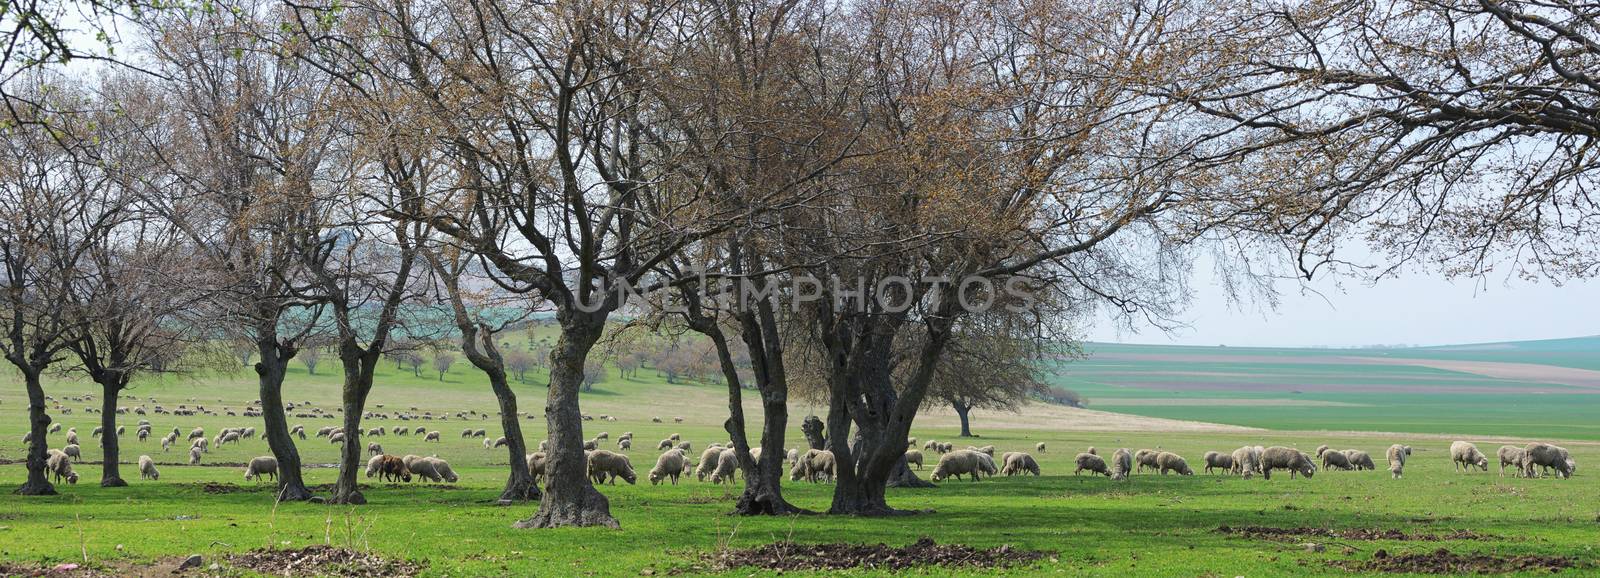 Flock of sheep by mady70